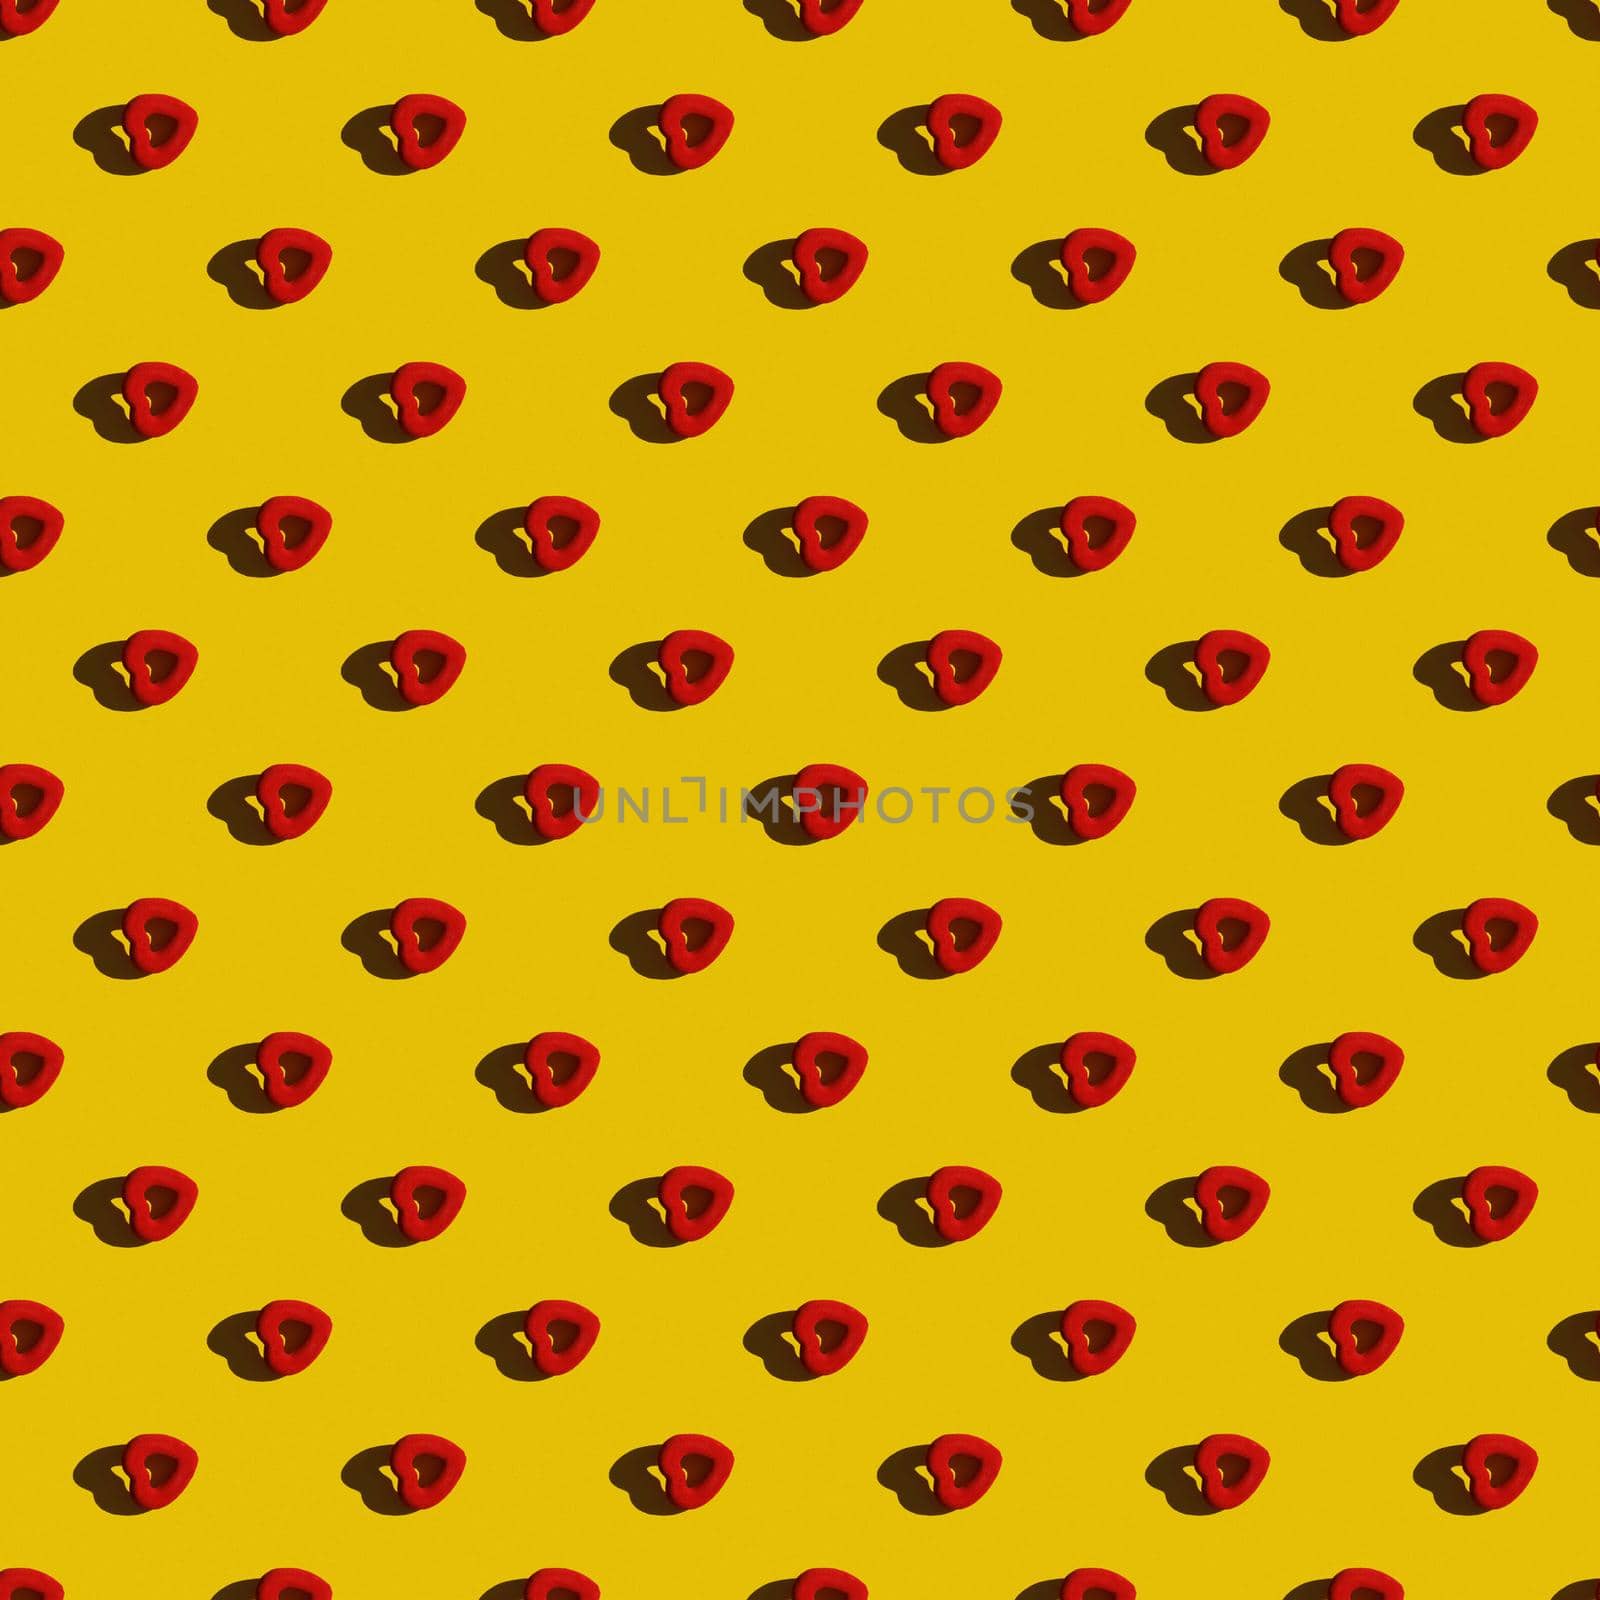 Template. Red heart in a row diagonally on a yellow background. Top view, flat lay, layout. Romantic colorful pattern.